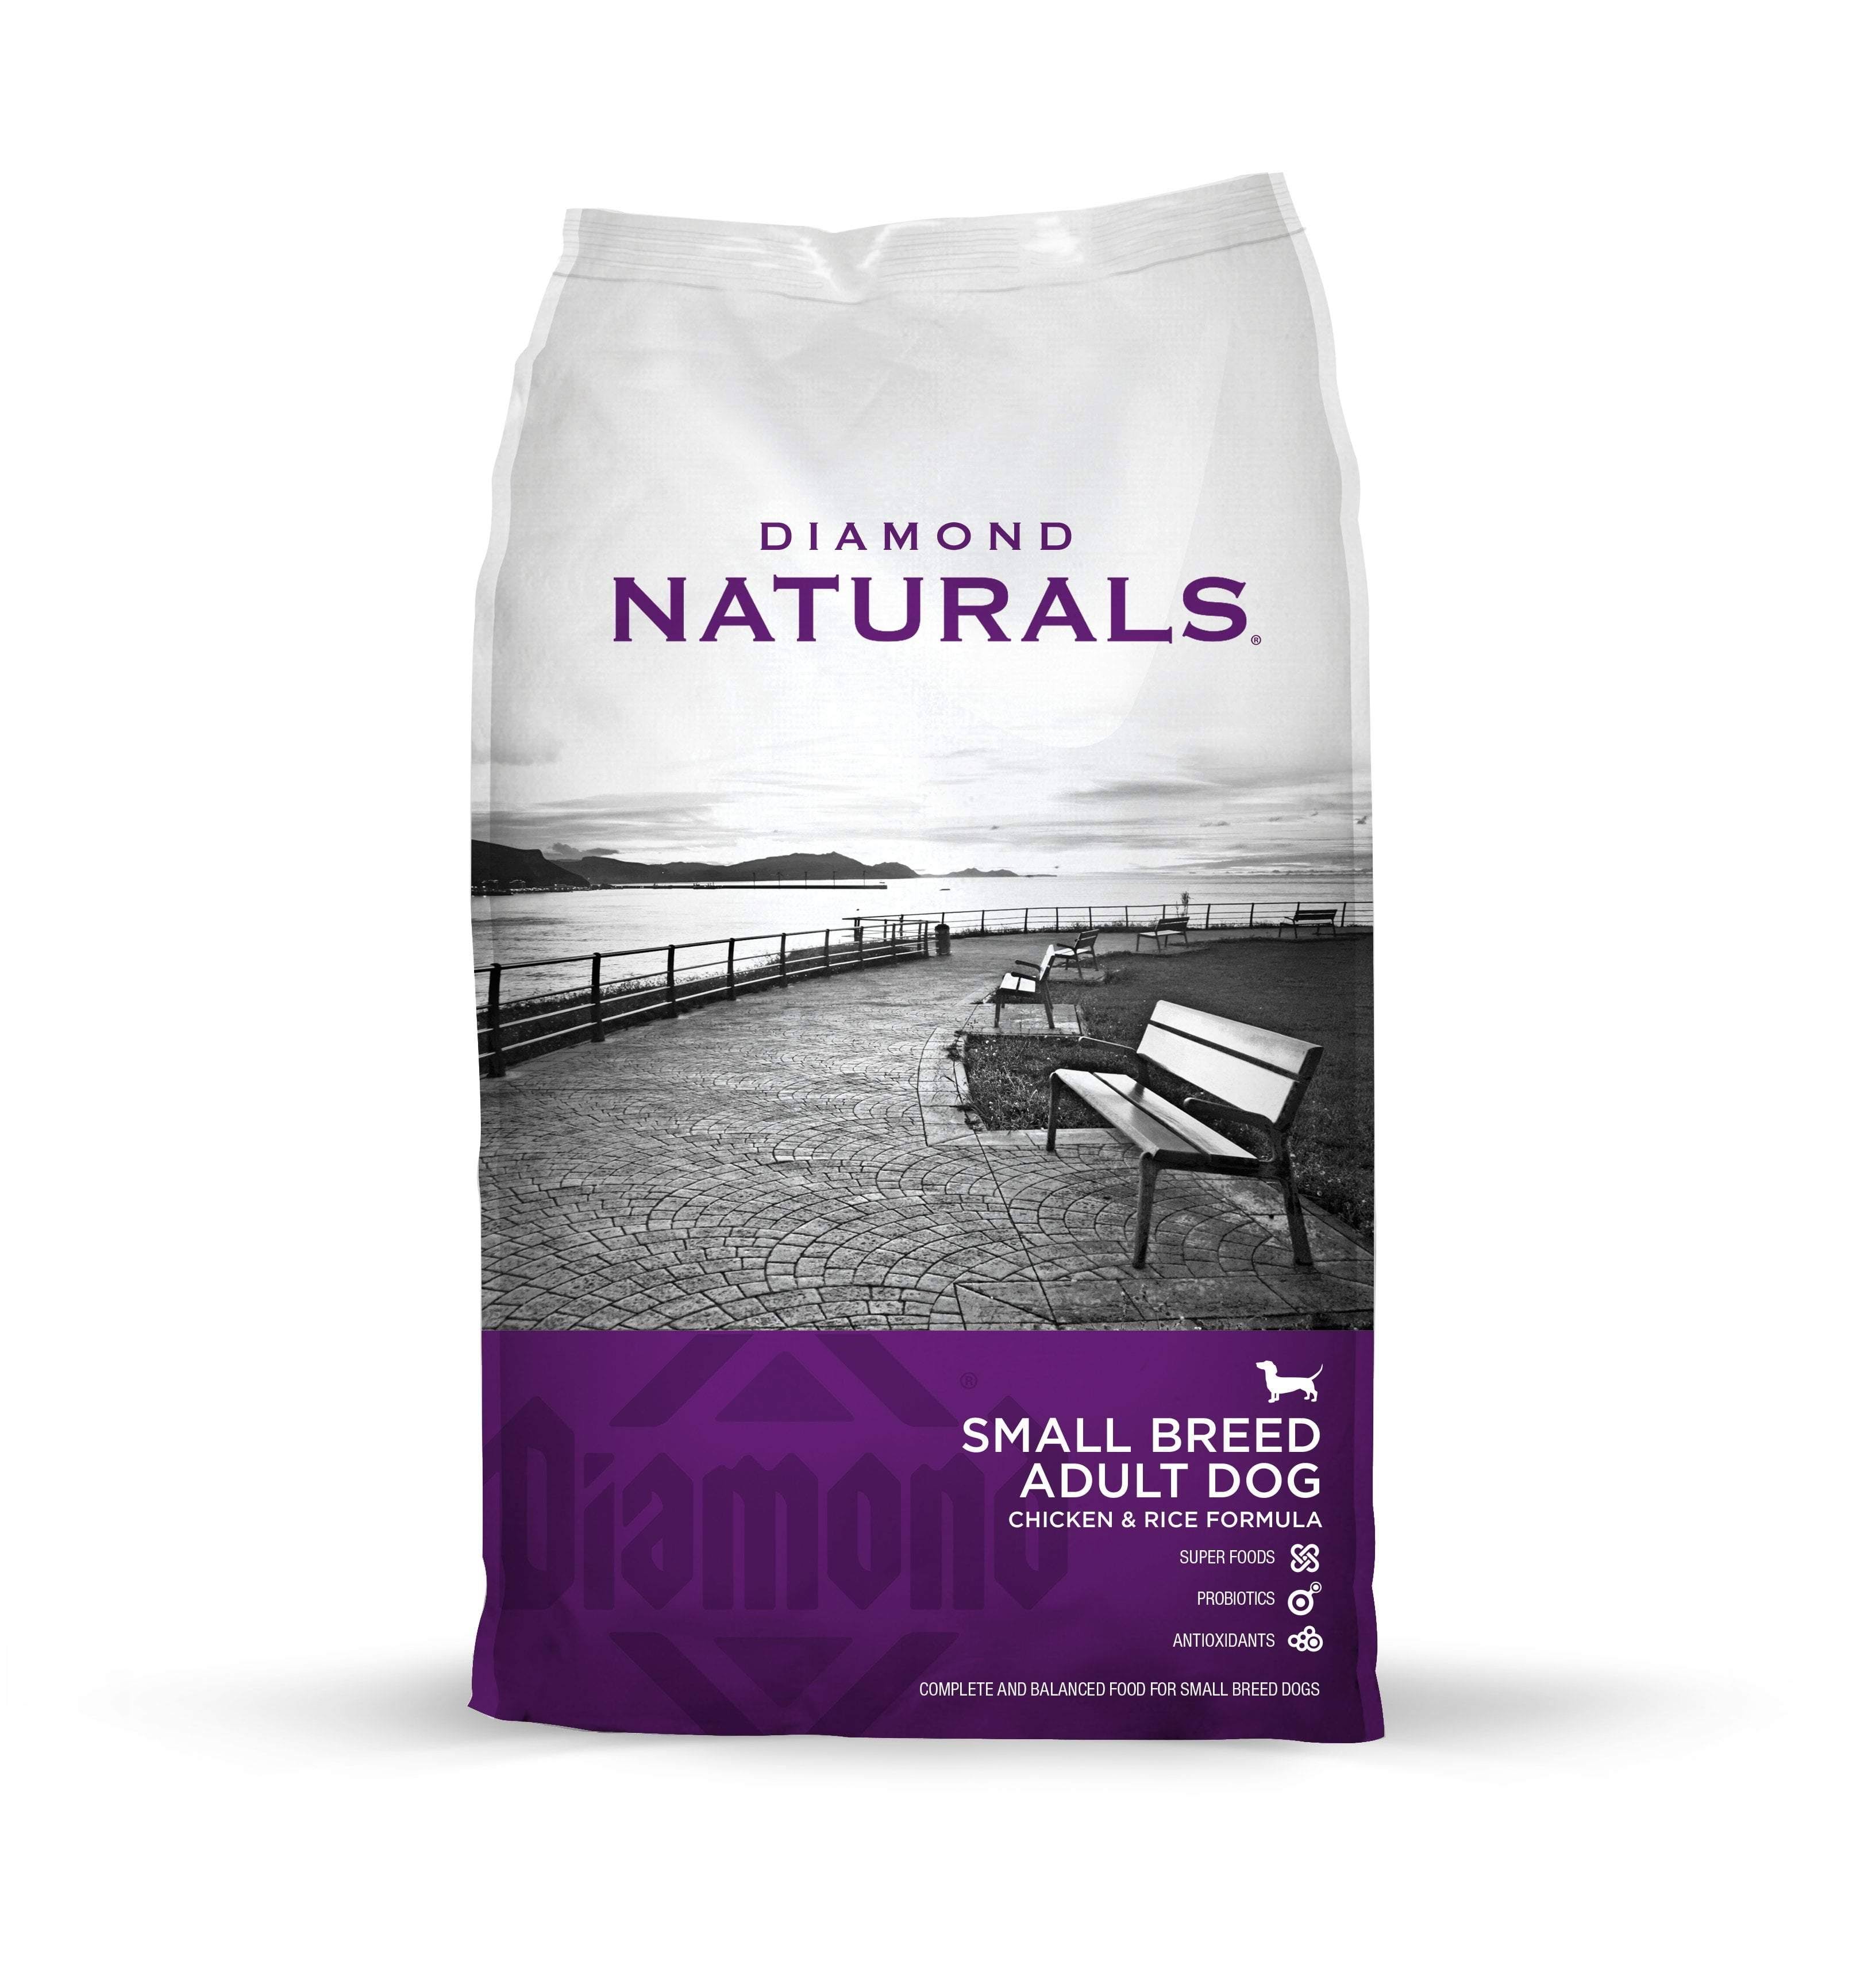 Diamond Naturals Dry Food for Adult Dogs - Small Breed, Chicken and Rice Formula, 18lb